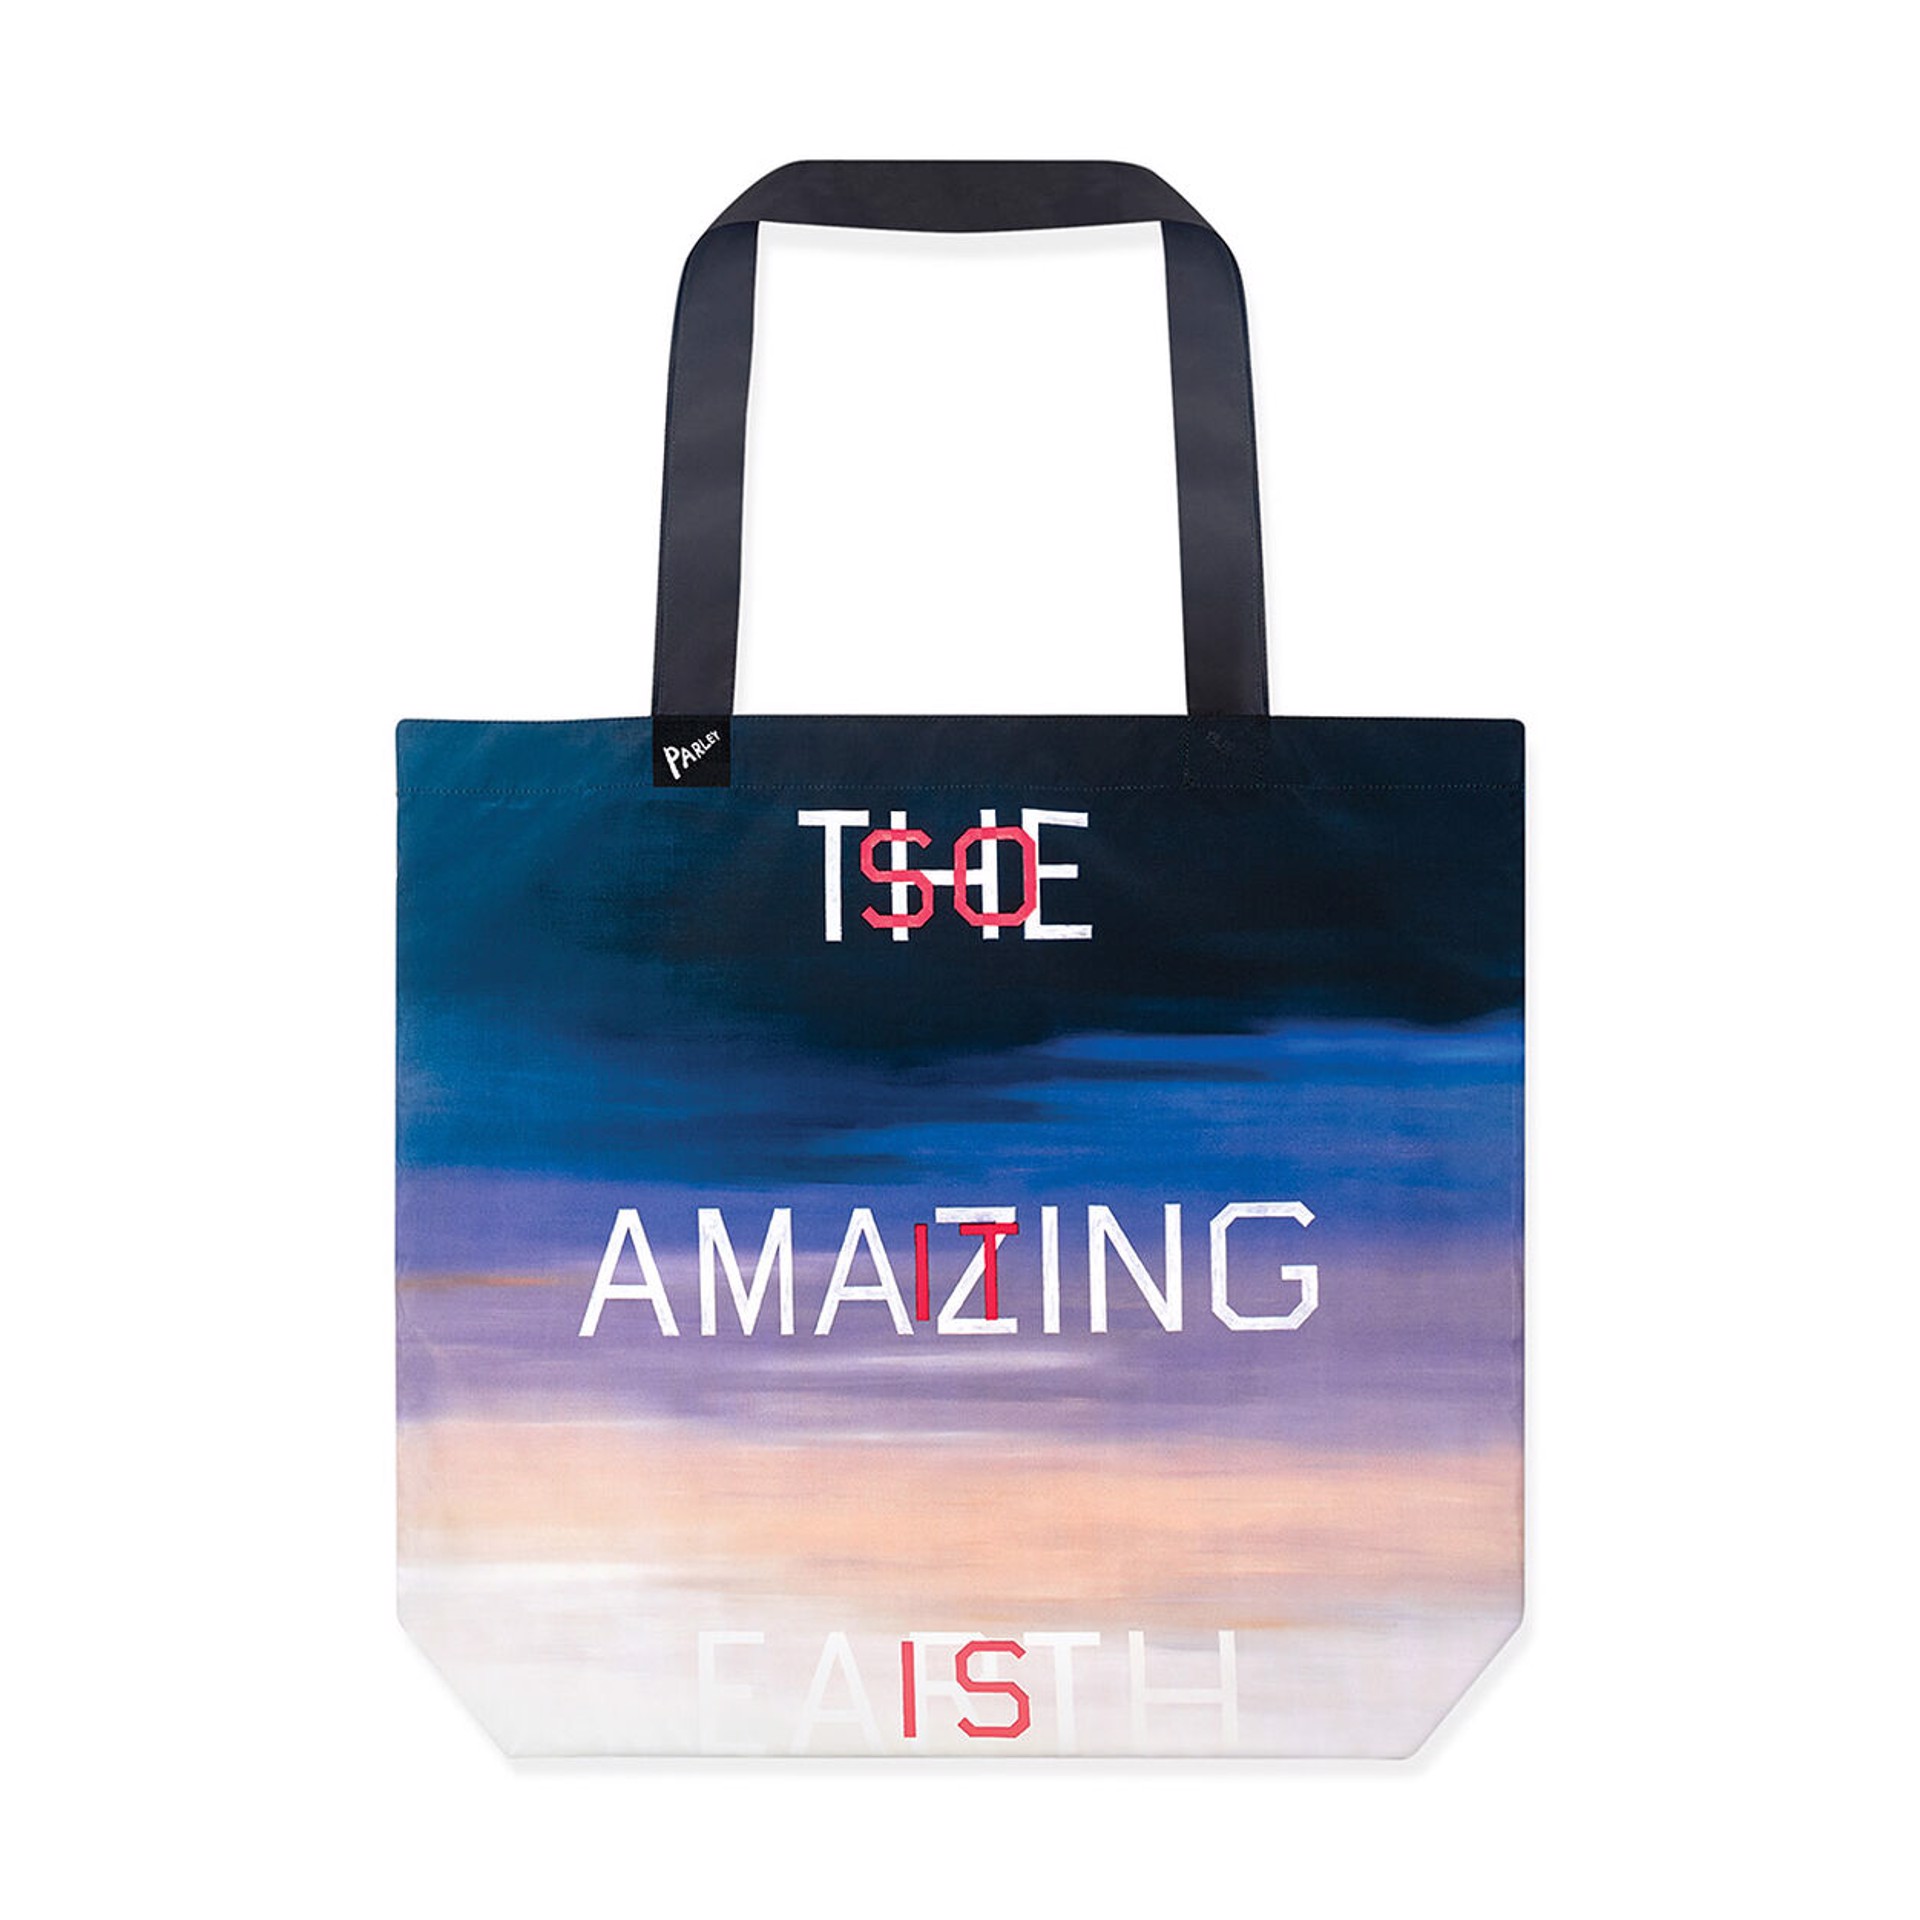 Ed Ruscha Parley for the Oceans Tote by Ed Ruscha